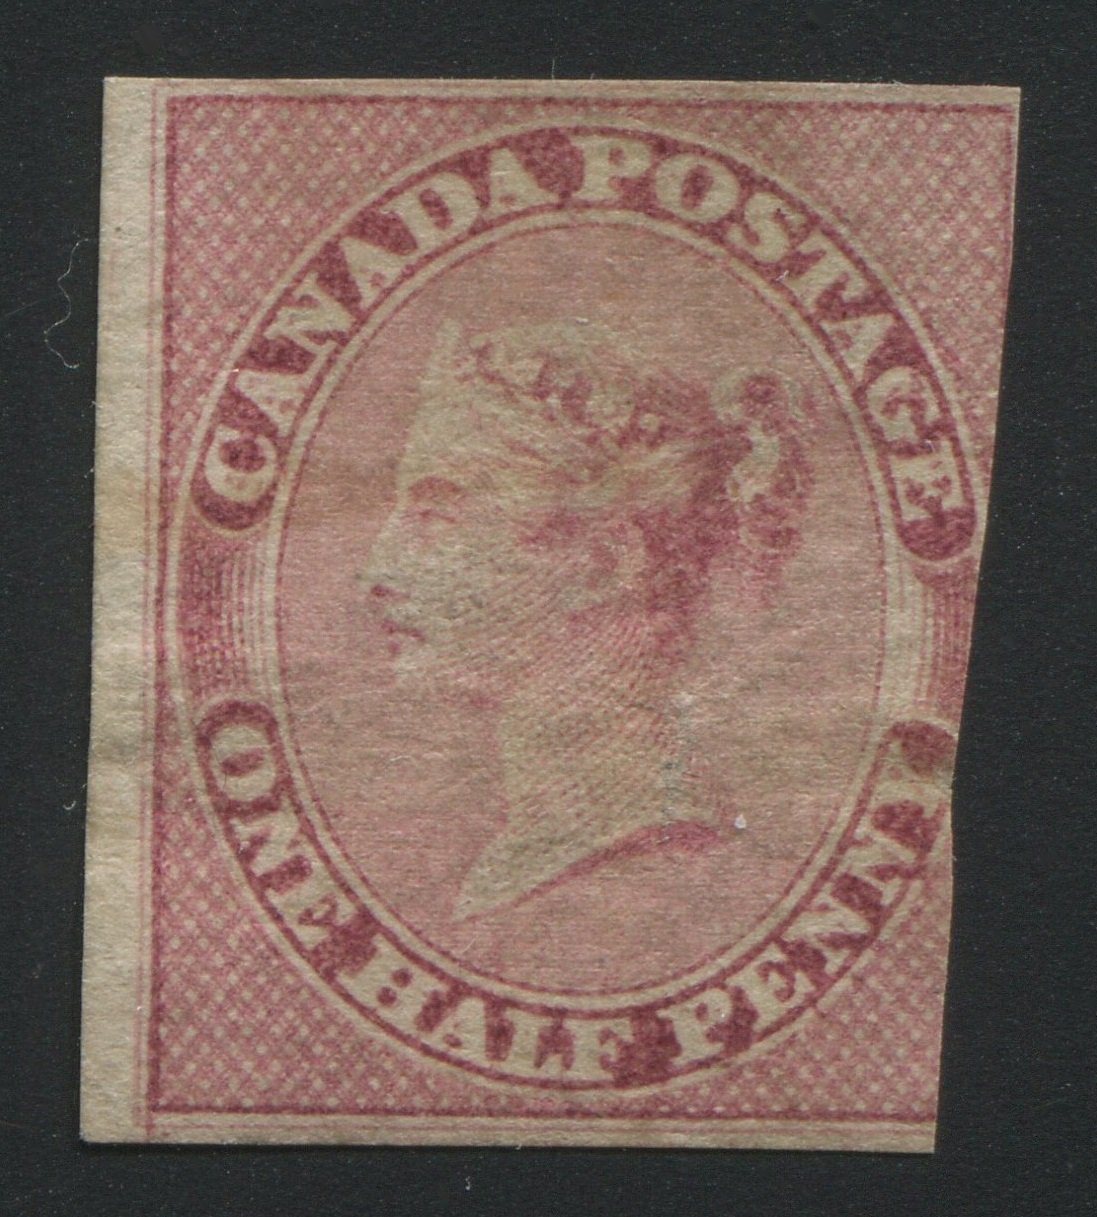 0008CA1709 - Canada #8 - Used Major Re-Entry - Deveney Stamps Ltd. Canadian Stamps